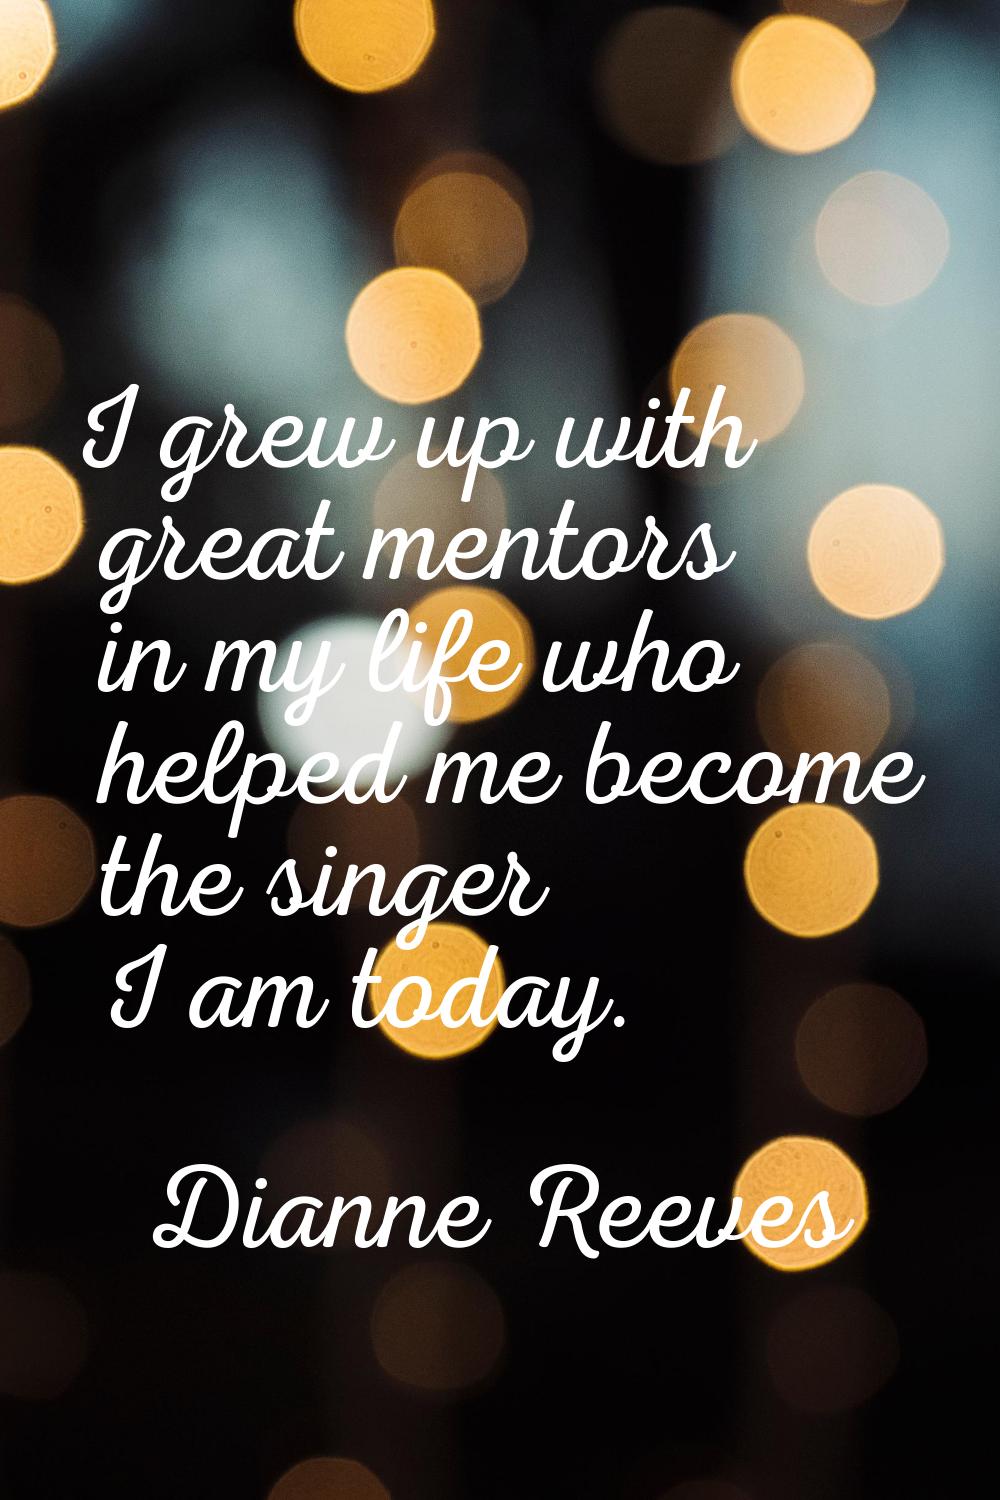 I grew up with great mentors in my life who helped me become the singer I am today.